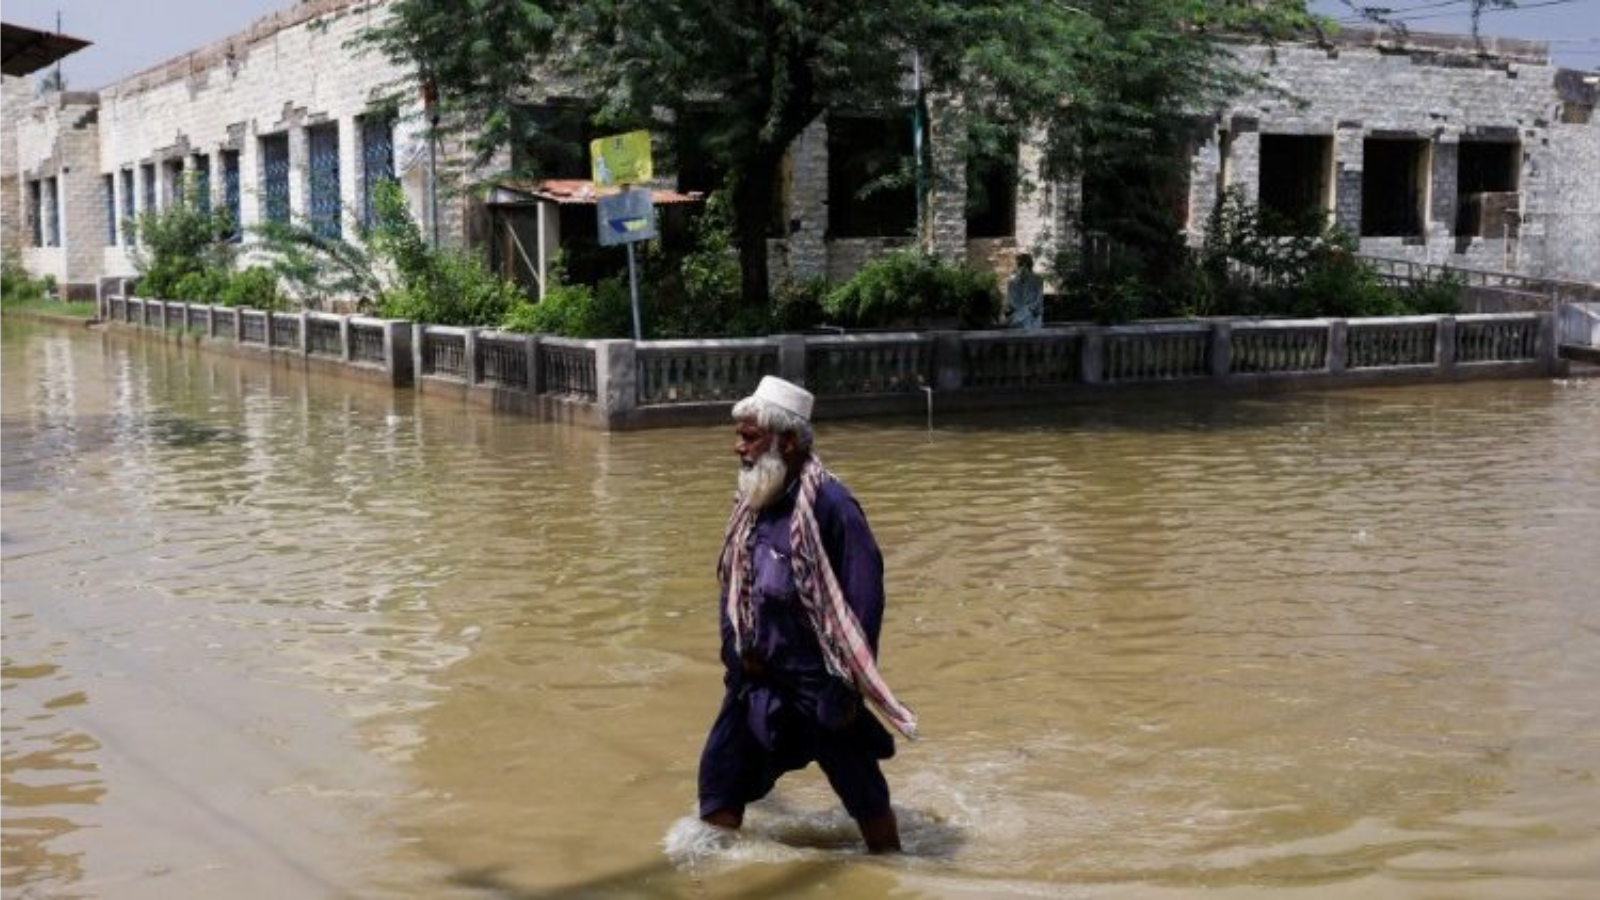 Pakistan Floods – please pray for people in need